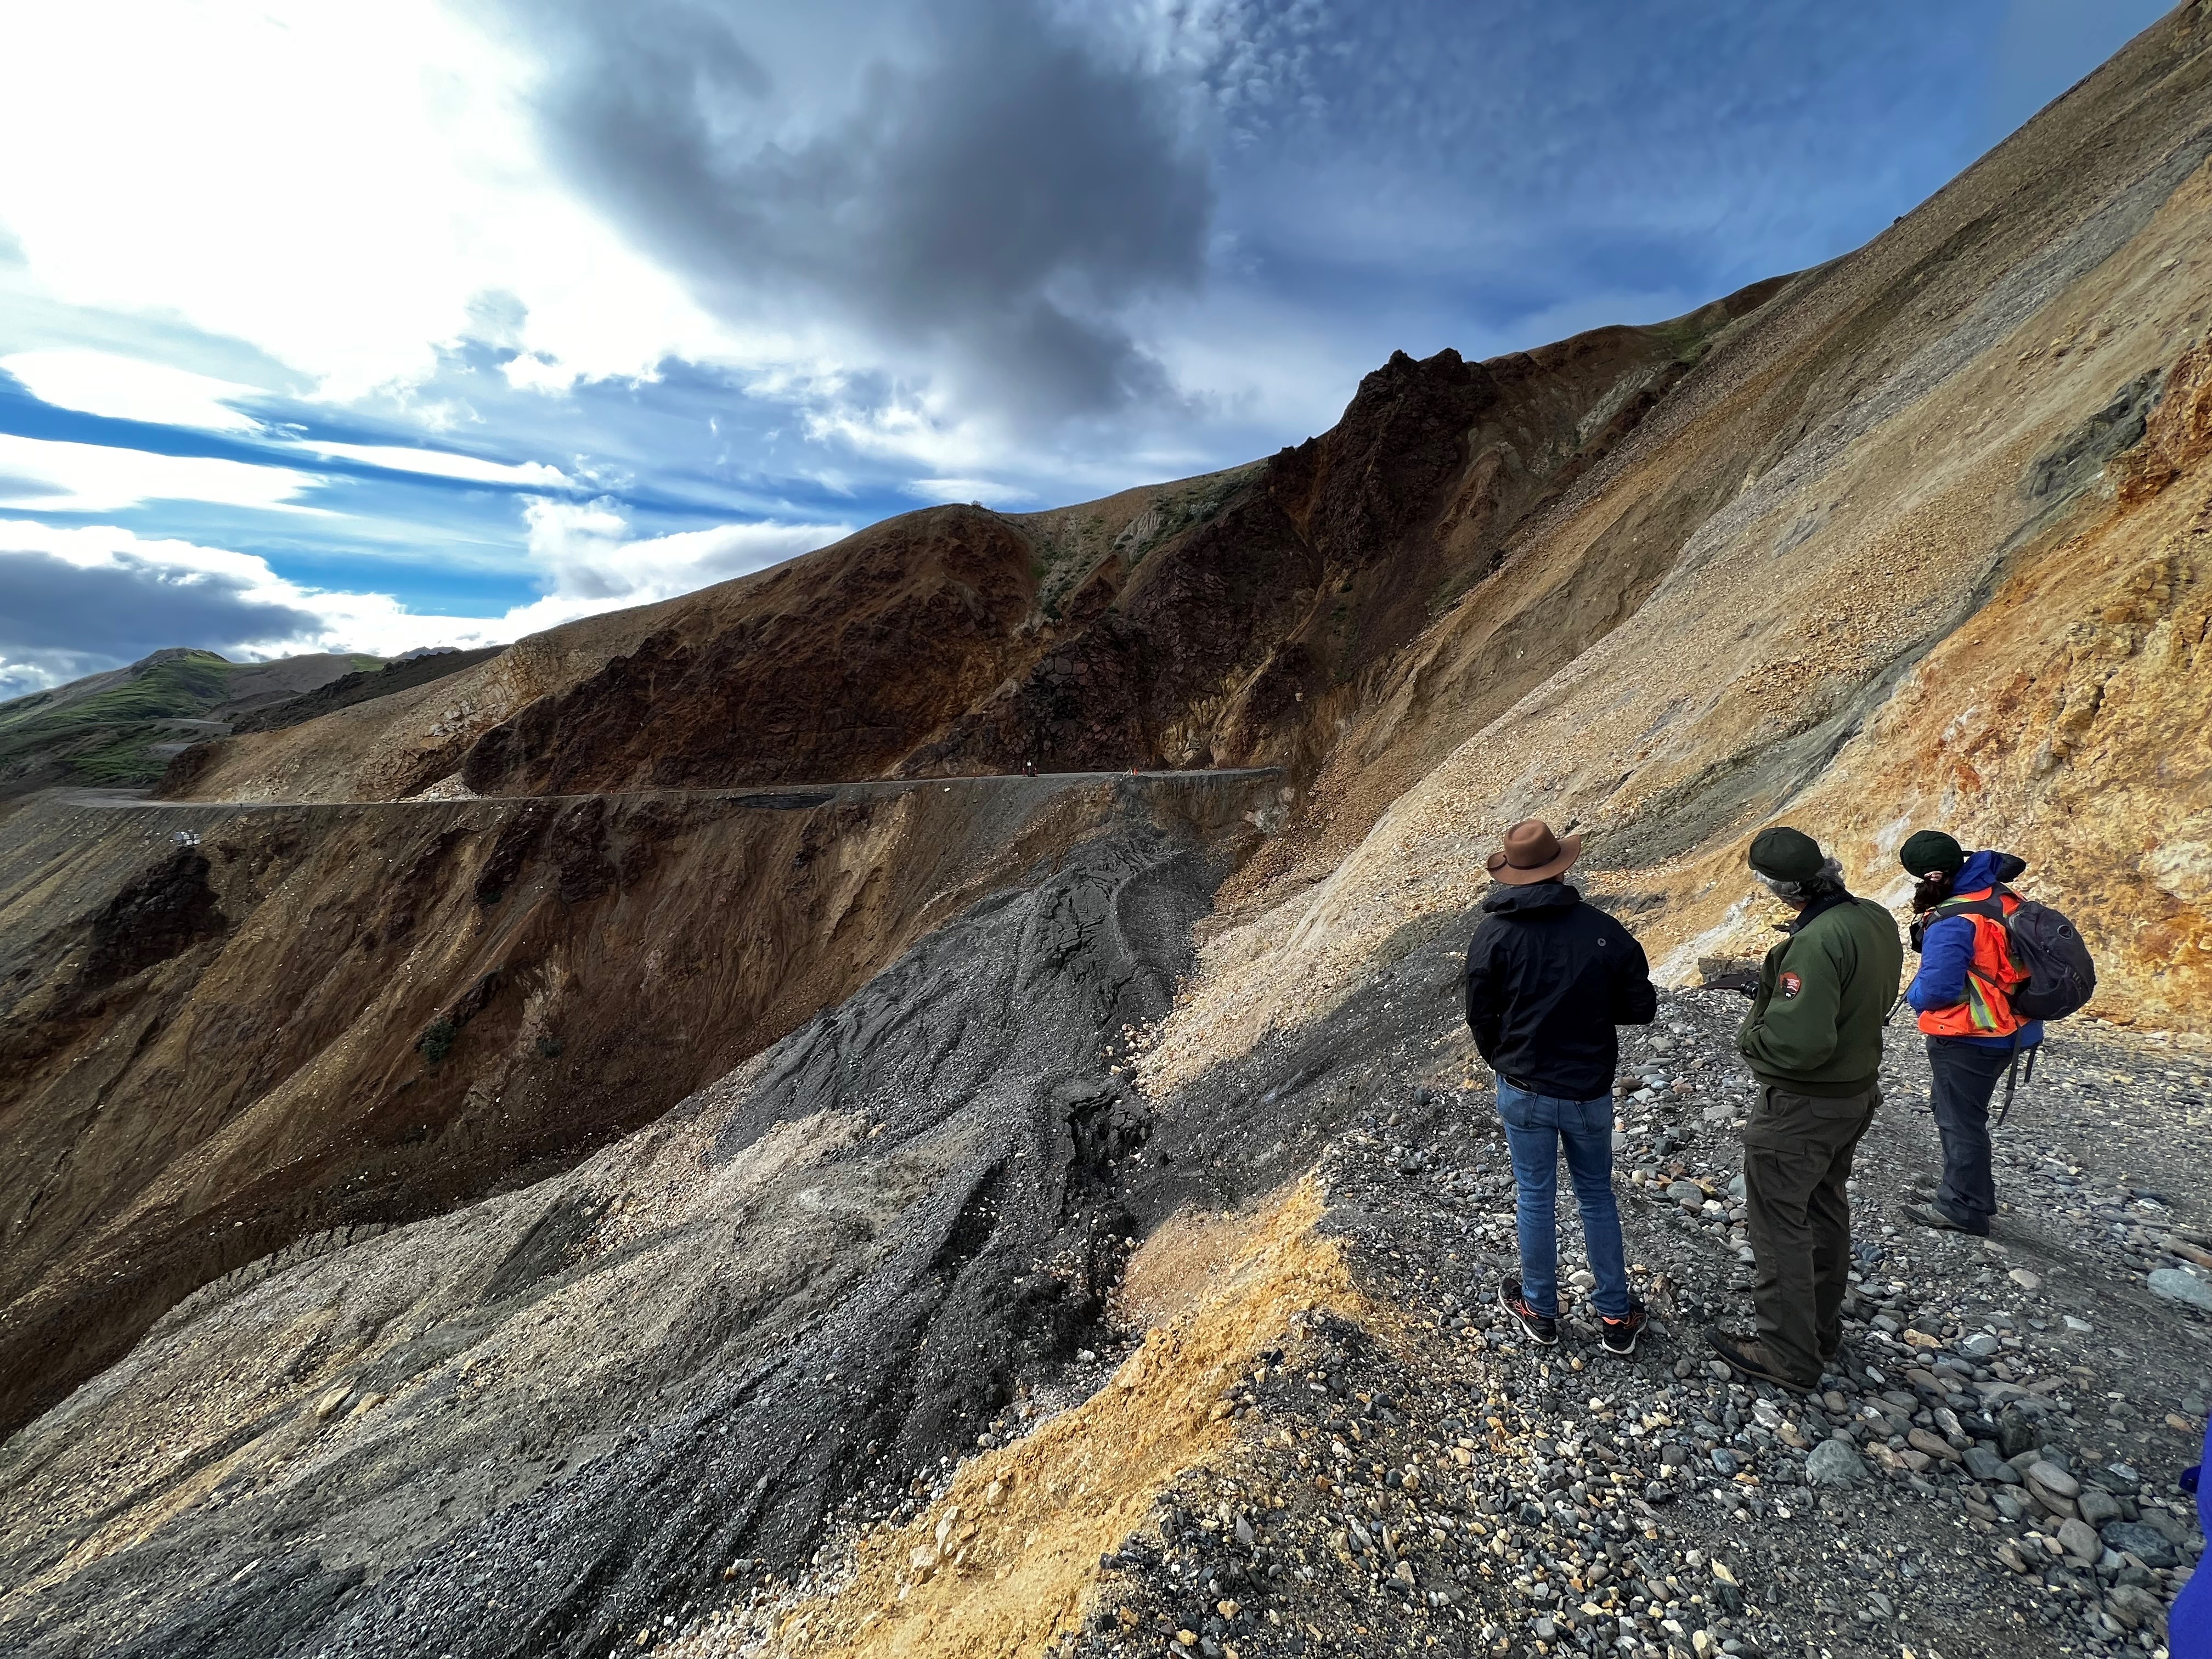 The Pretty Rocks landslide intersects the Denali Park Road near its midpoint at Mile 45.4 and displaces 100 yards (90 m) of the full width of the road